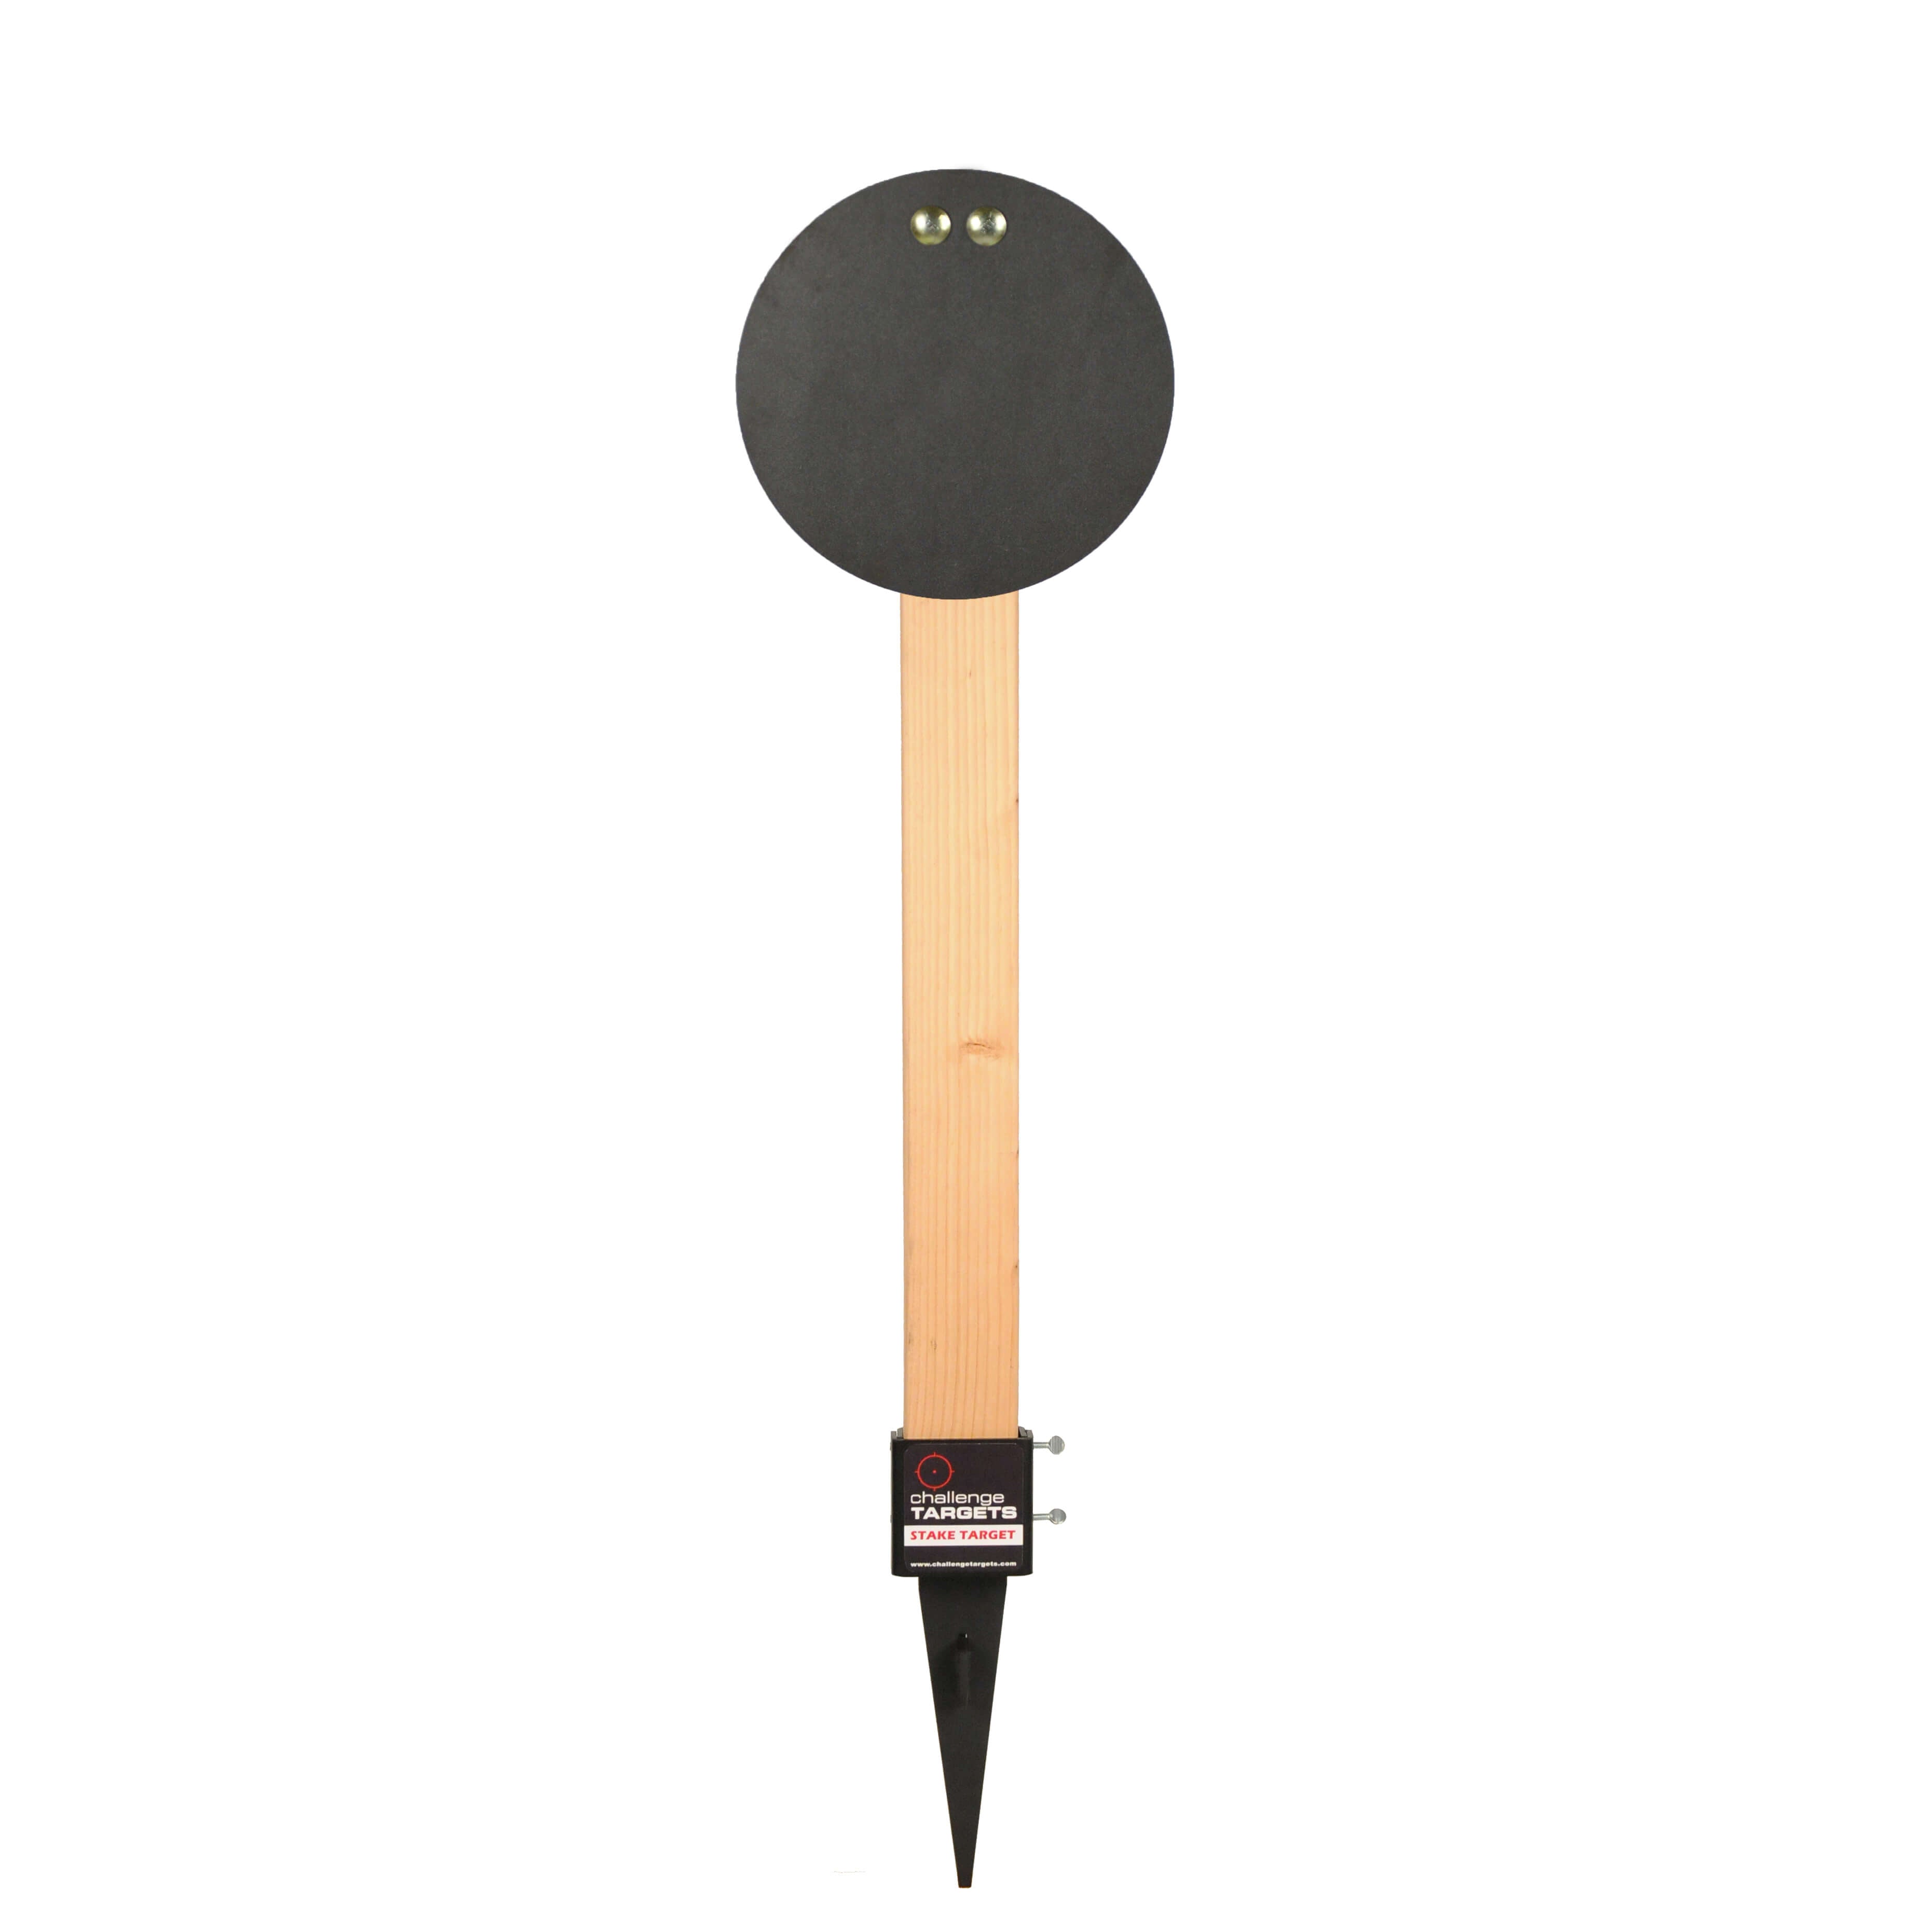 Stake Target - 12" Round - Rifle Rated